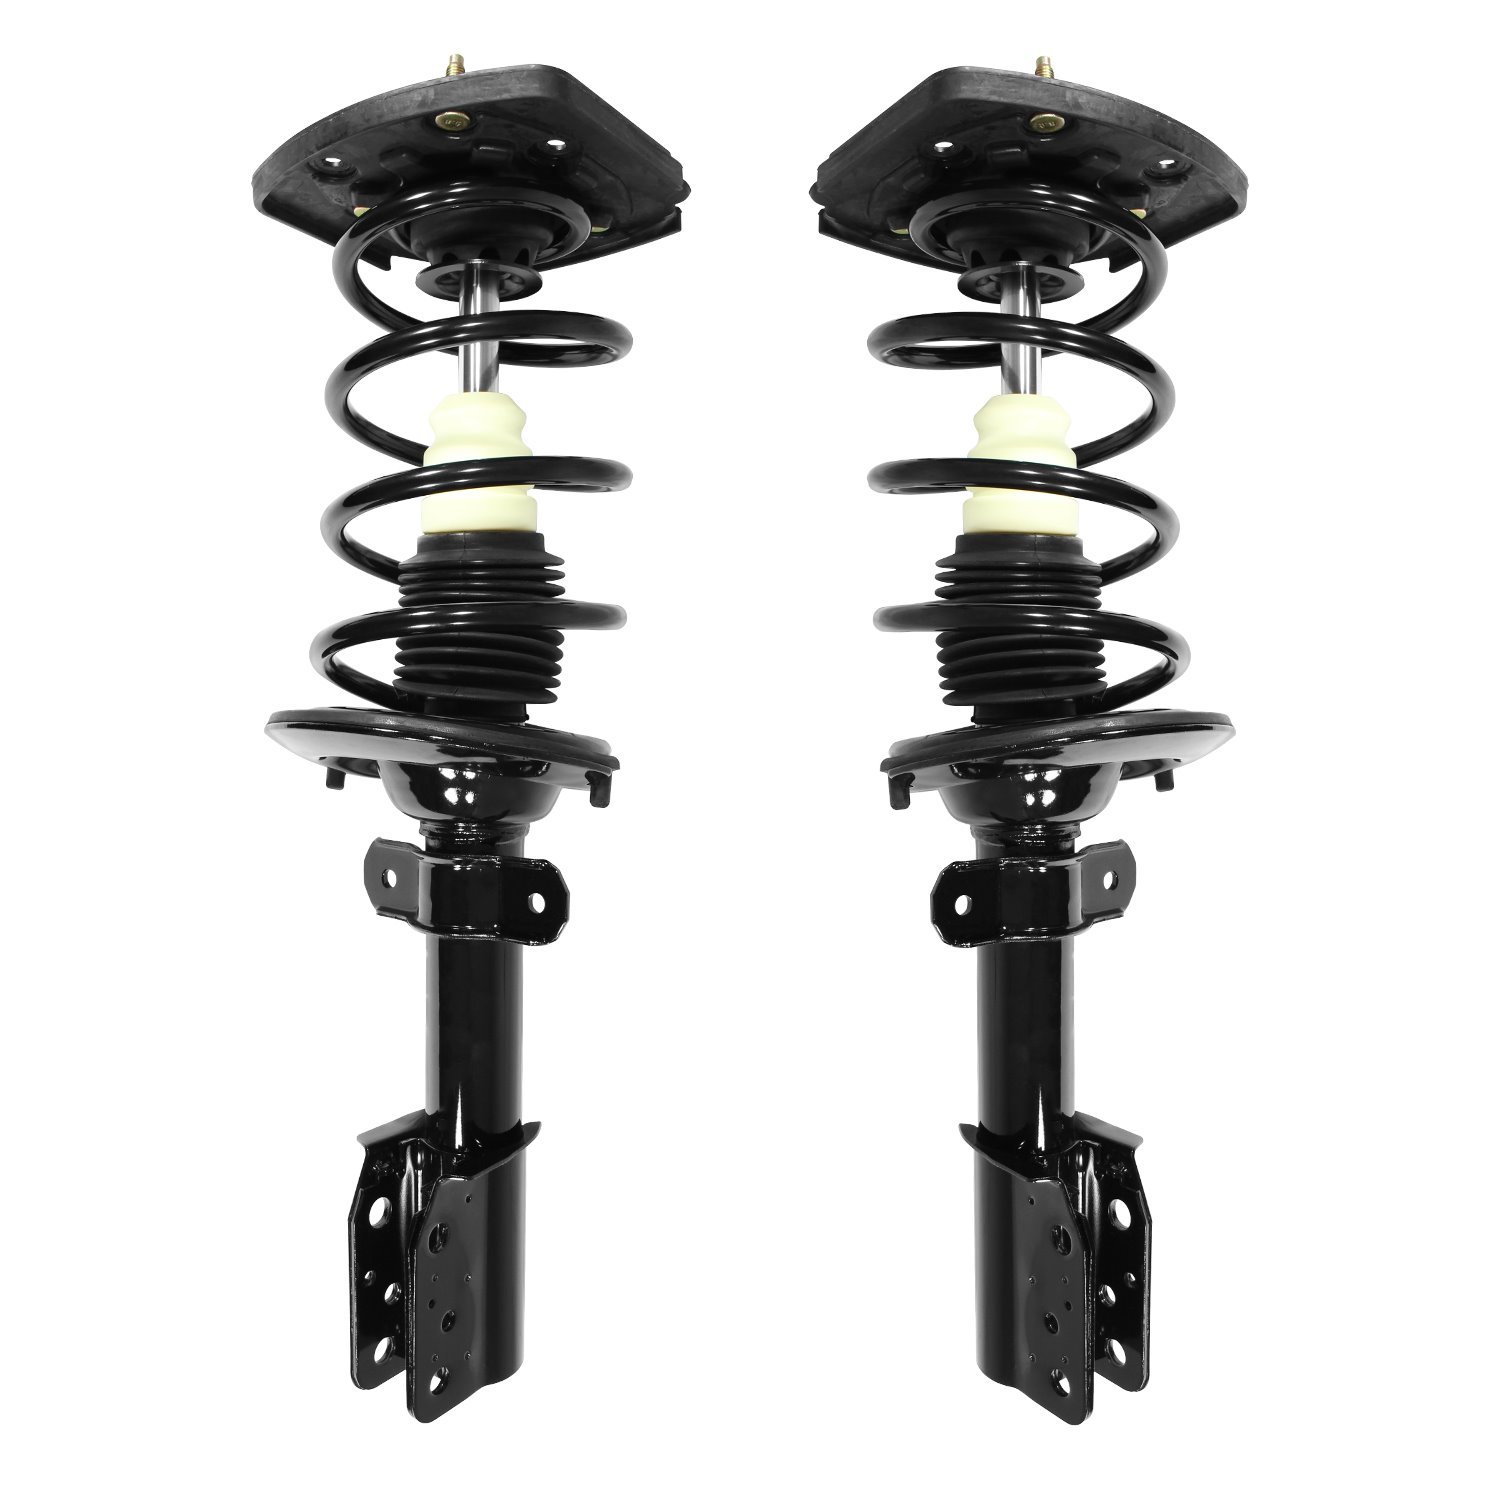 2-15061-15062-001 Suspension Strut & Coil Spring Assembly Set Fits Select Chevy Impala, Chevy Monte Carlo, Oldsmobile Intrigue